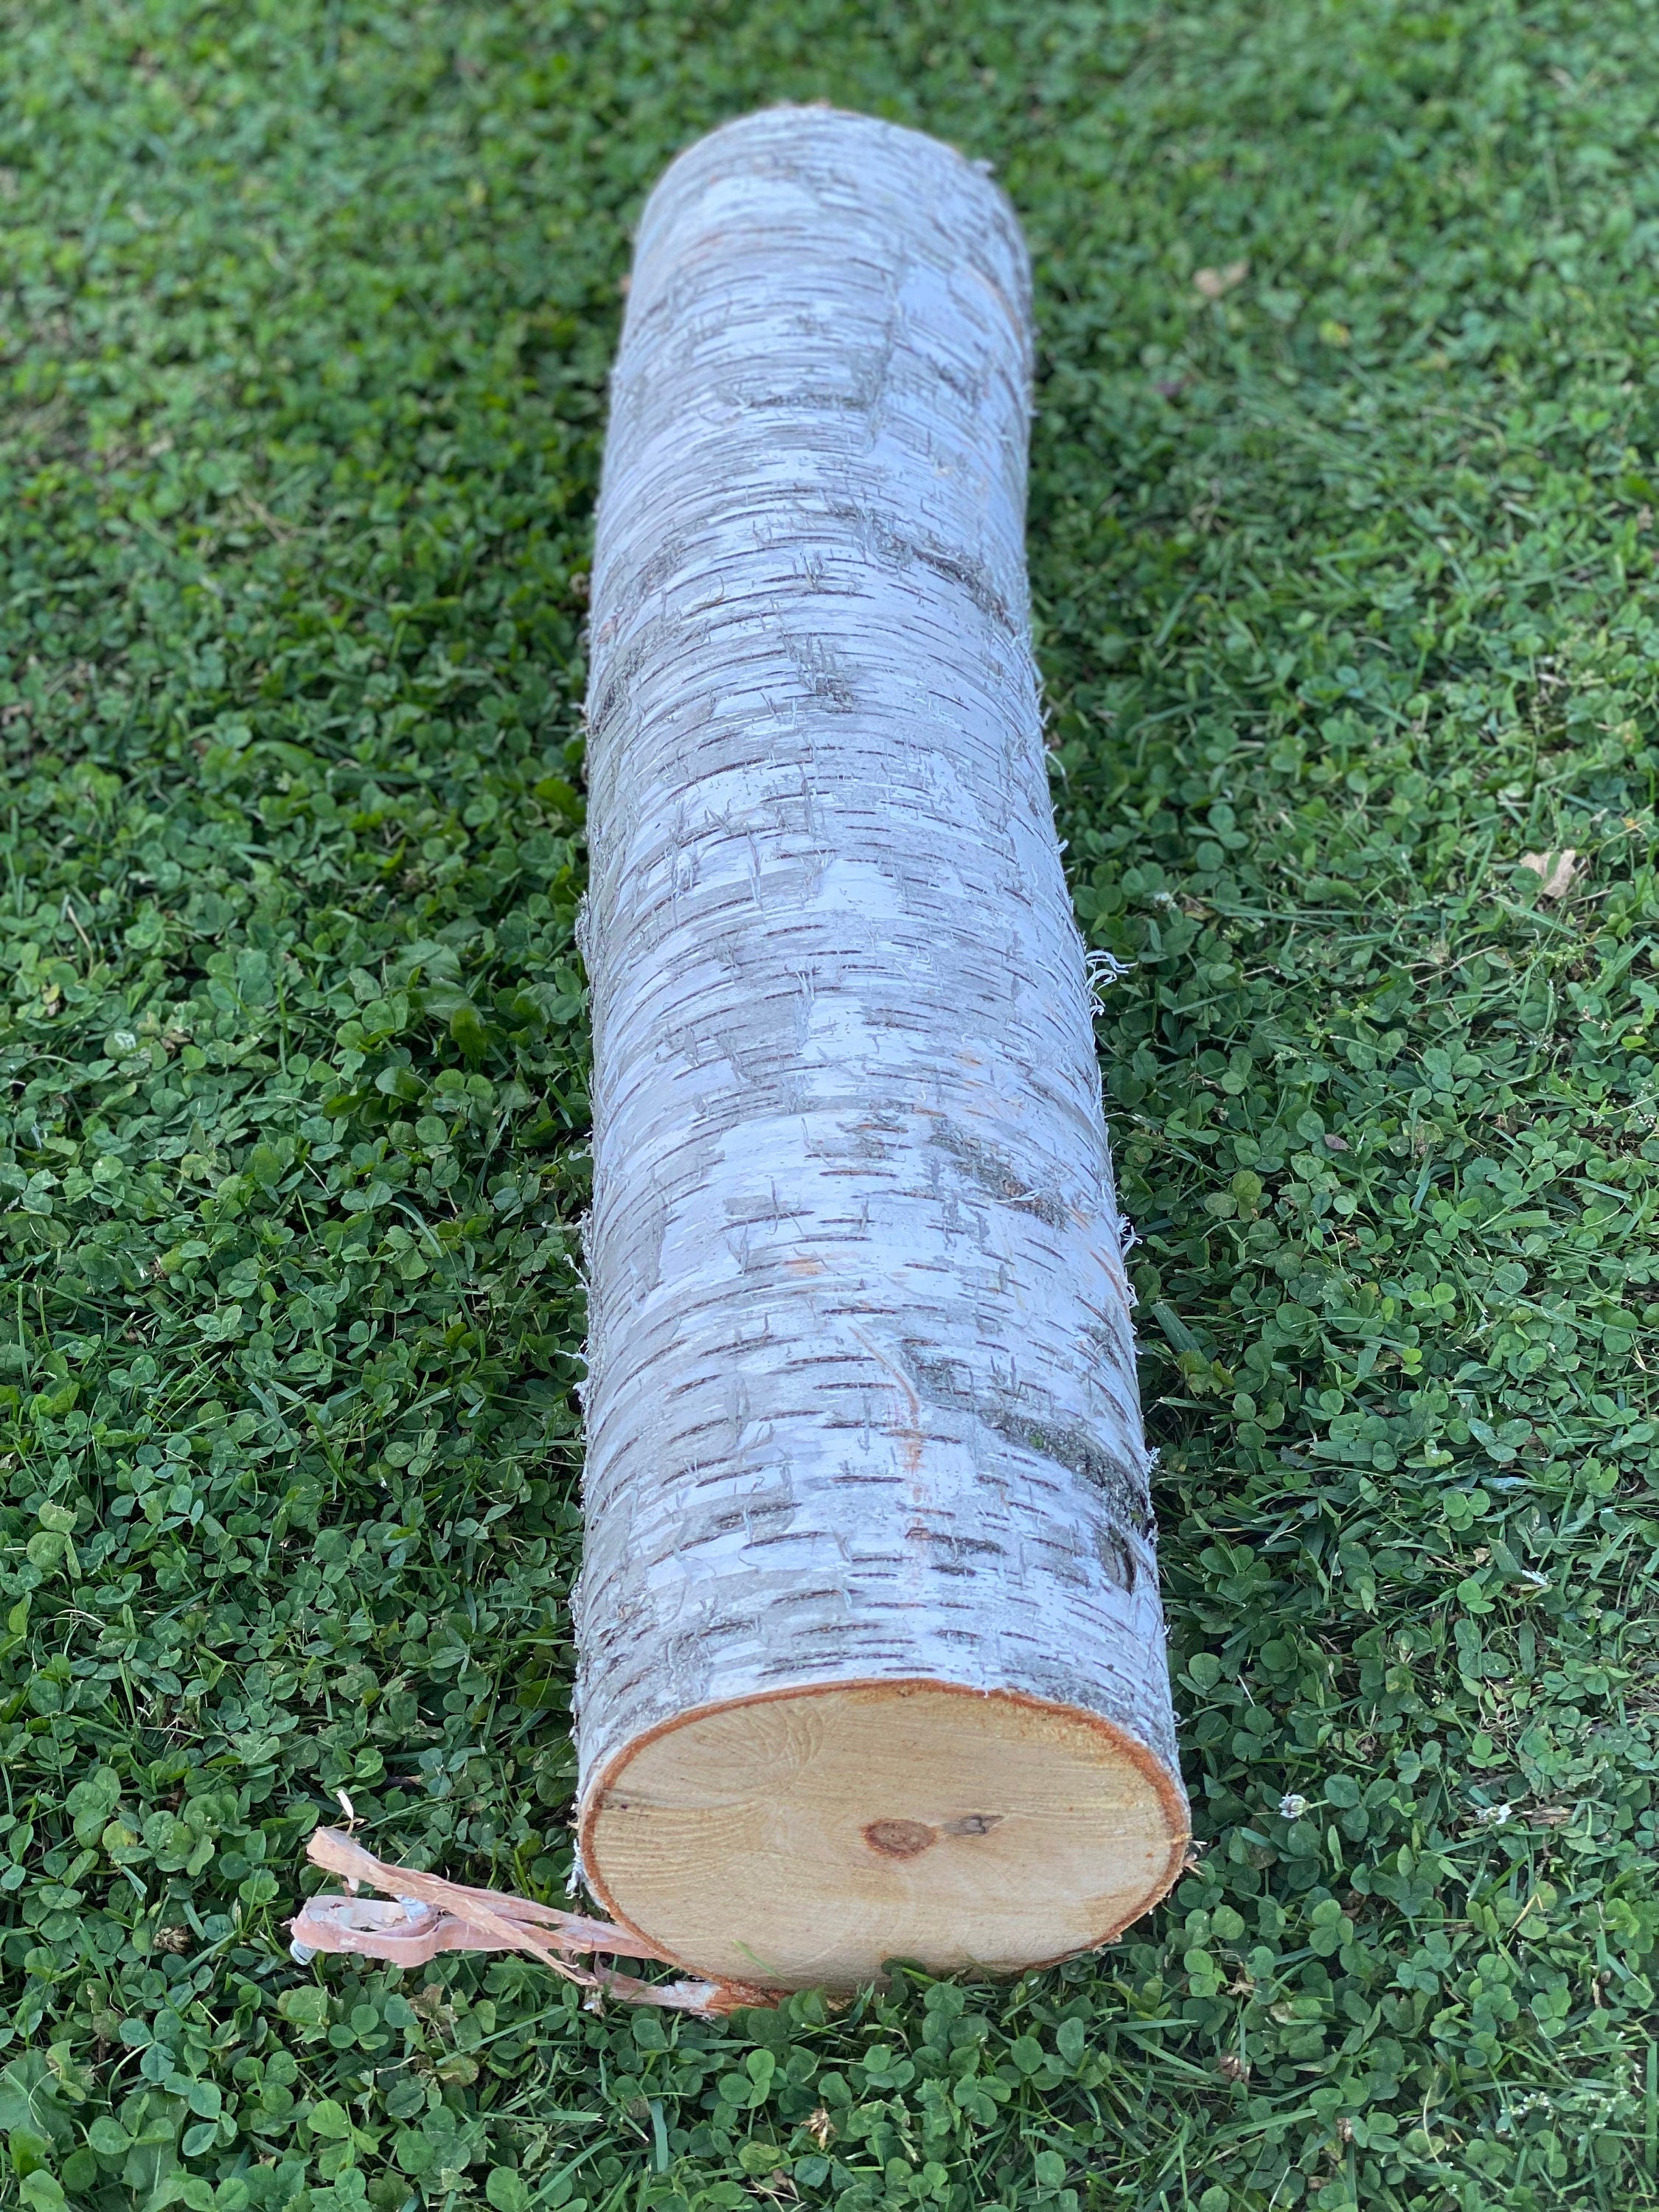 One White Birch Log Approximately 30 Inches Long by 5-6 Inches Diameter